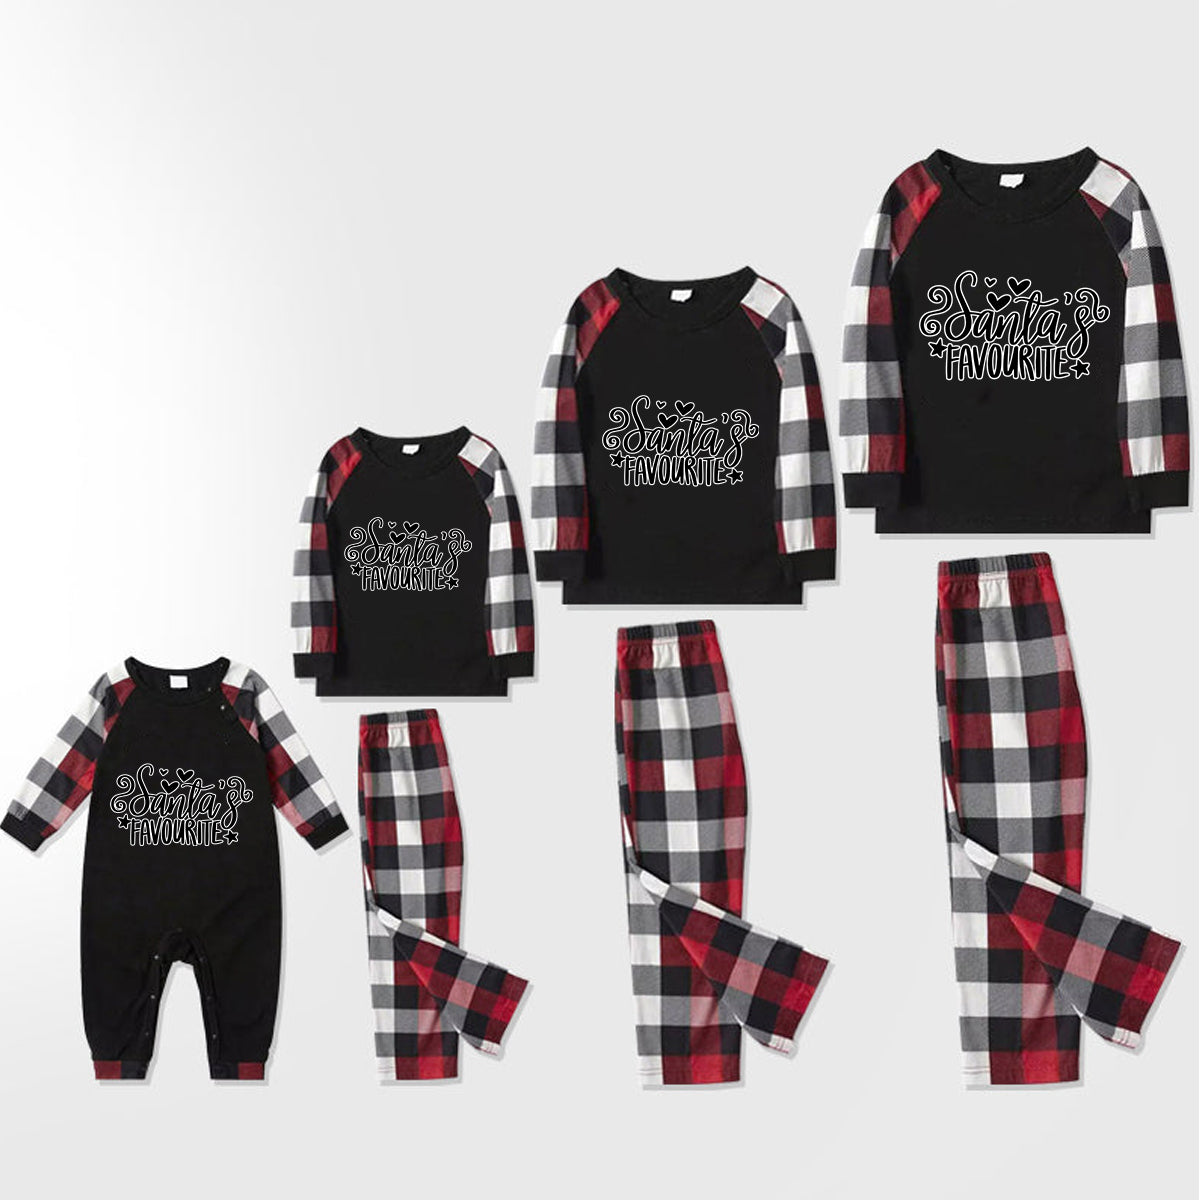 Christmas Cute Cartoon Patterned and 'Santa's Favorite   ' Letter Print Contrast Tops and Red & Black & White Plaid Pants Family Matching Pajamas Set With Dog Bandana